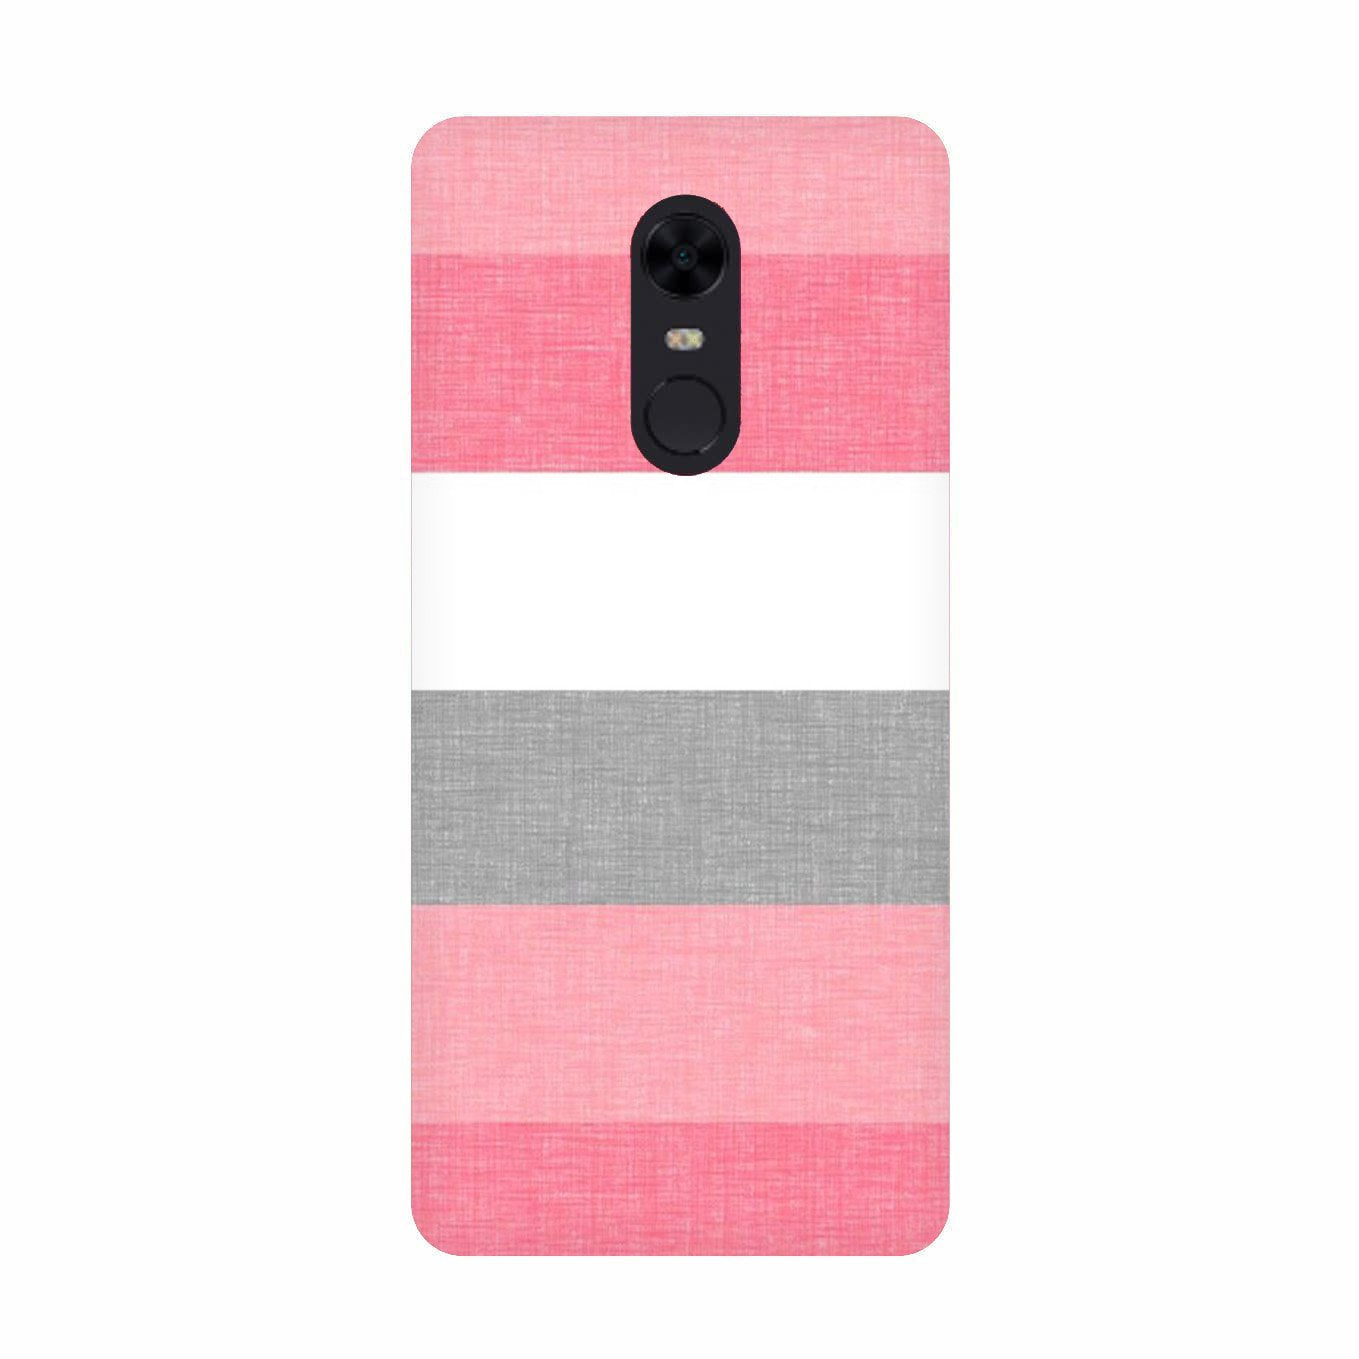 Pink white pattern Case for Redmi Note 4